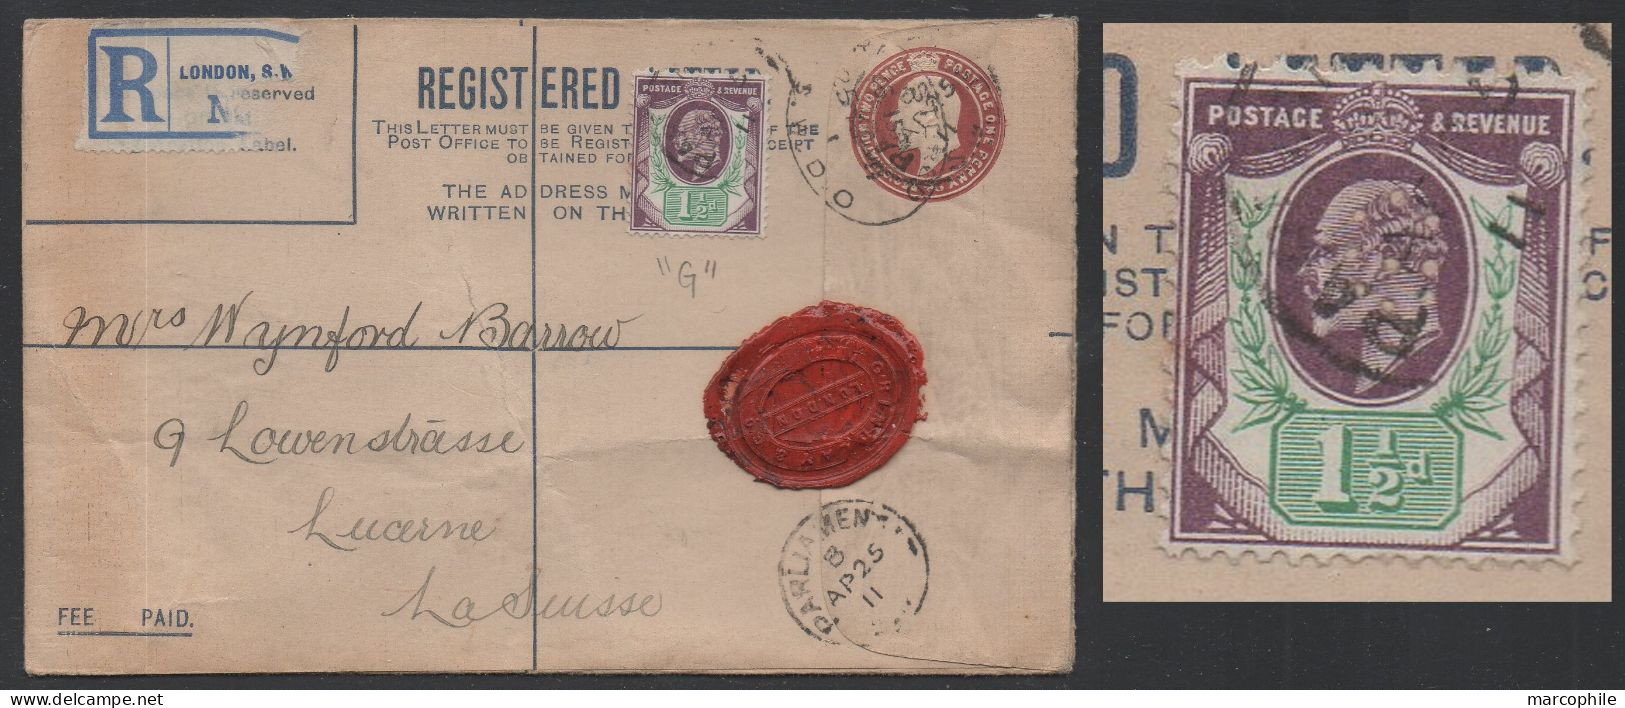 GB / 1911 PERFIN "G" (GRINDLAY & Co) WAX SEAL ON RGD COVER ==> SWITZERLAND (ref 9012) - Perfin